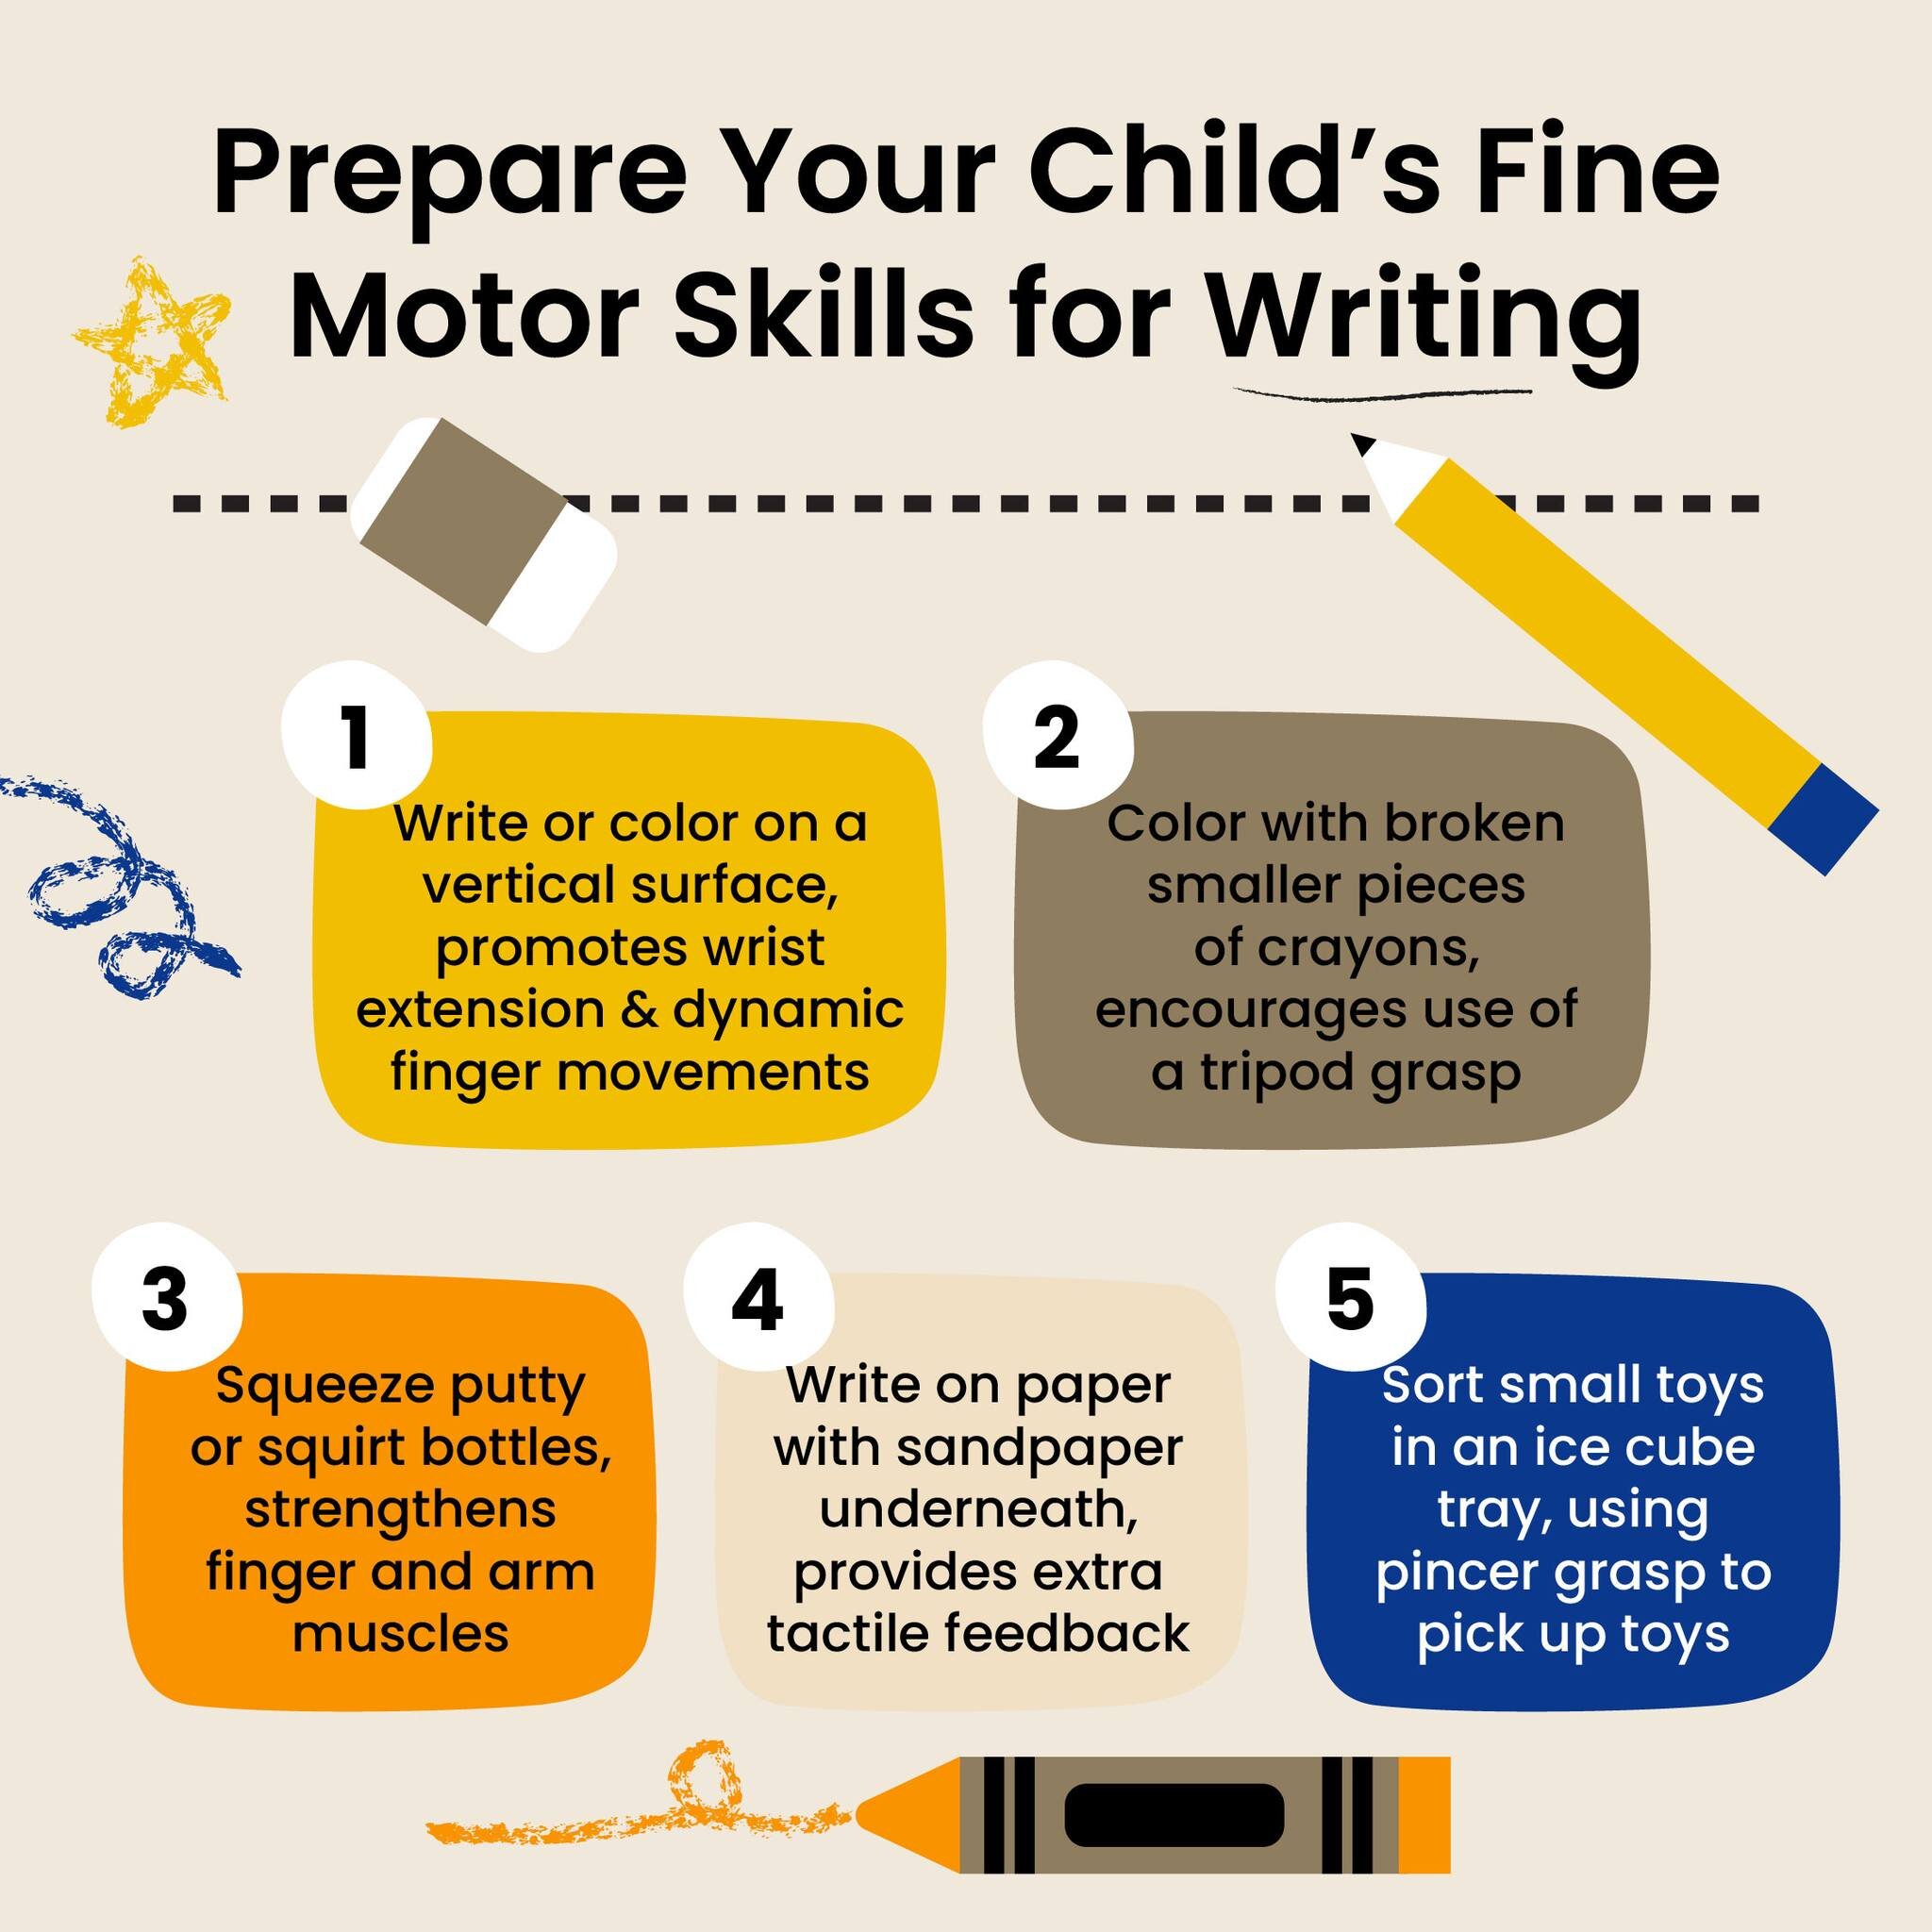 Children need to develop and refine their use of their small muscles. They need to practice controlling their hand, fingers and wrists. Fine motor skills allow the precision, dexterity and coordination required to write.

#earlylearning #earlylearnin